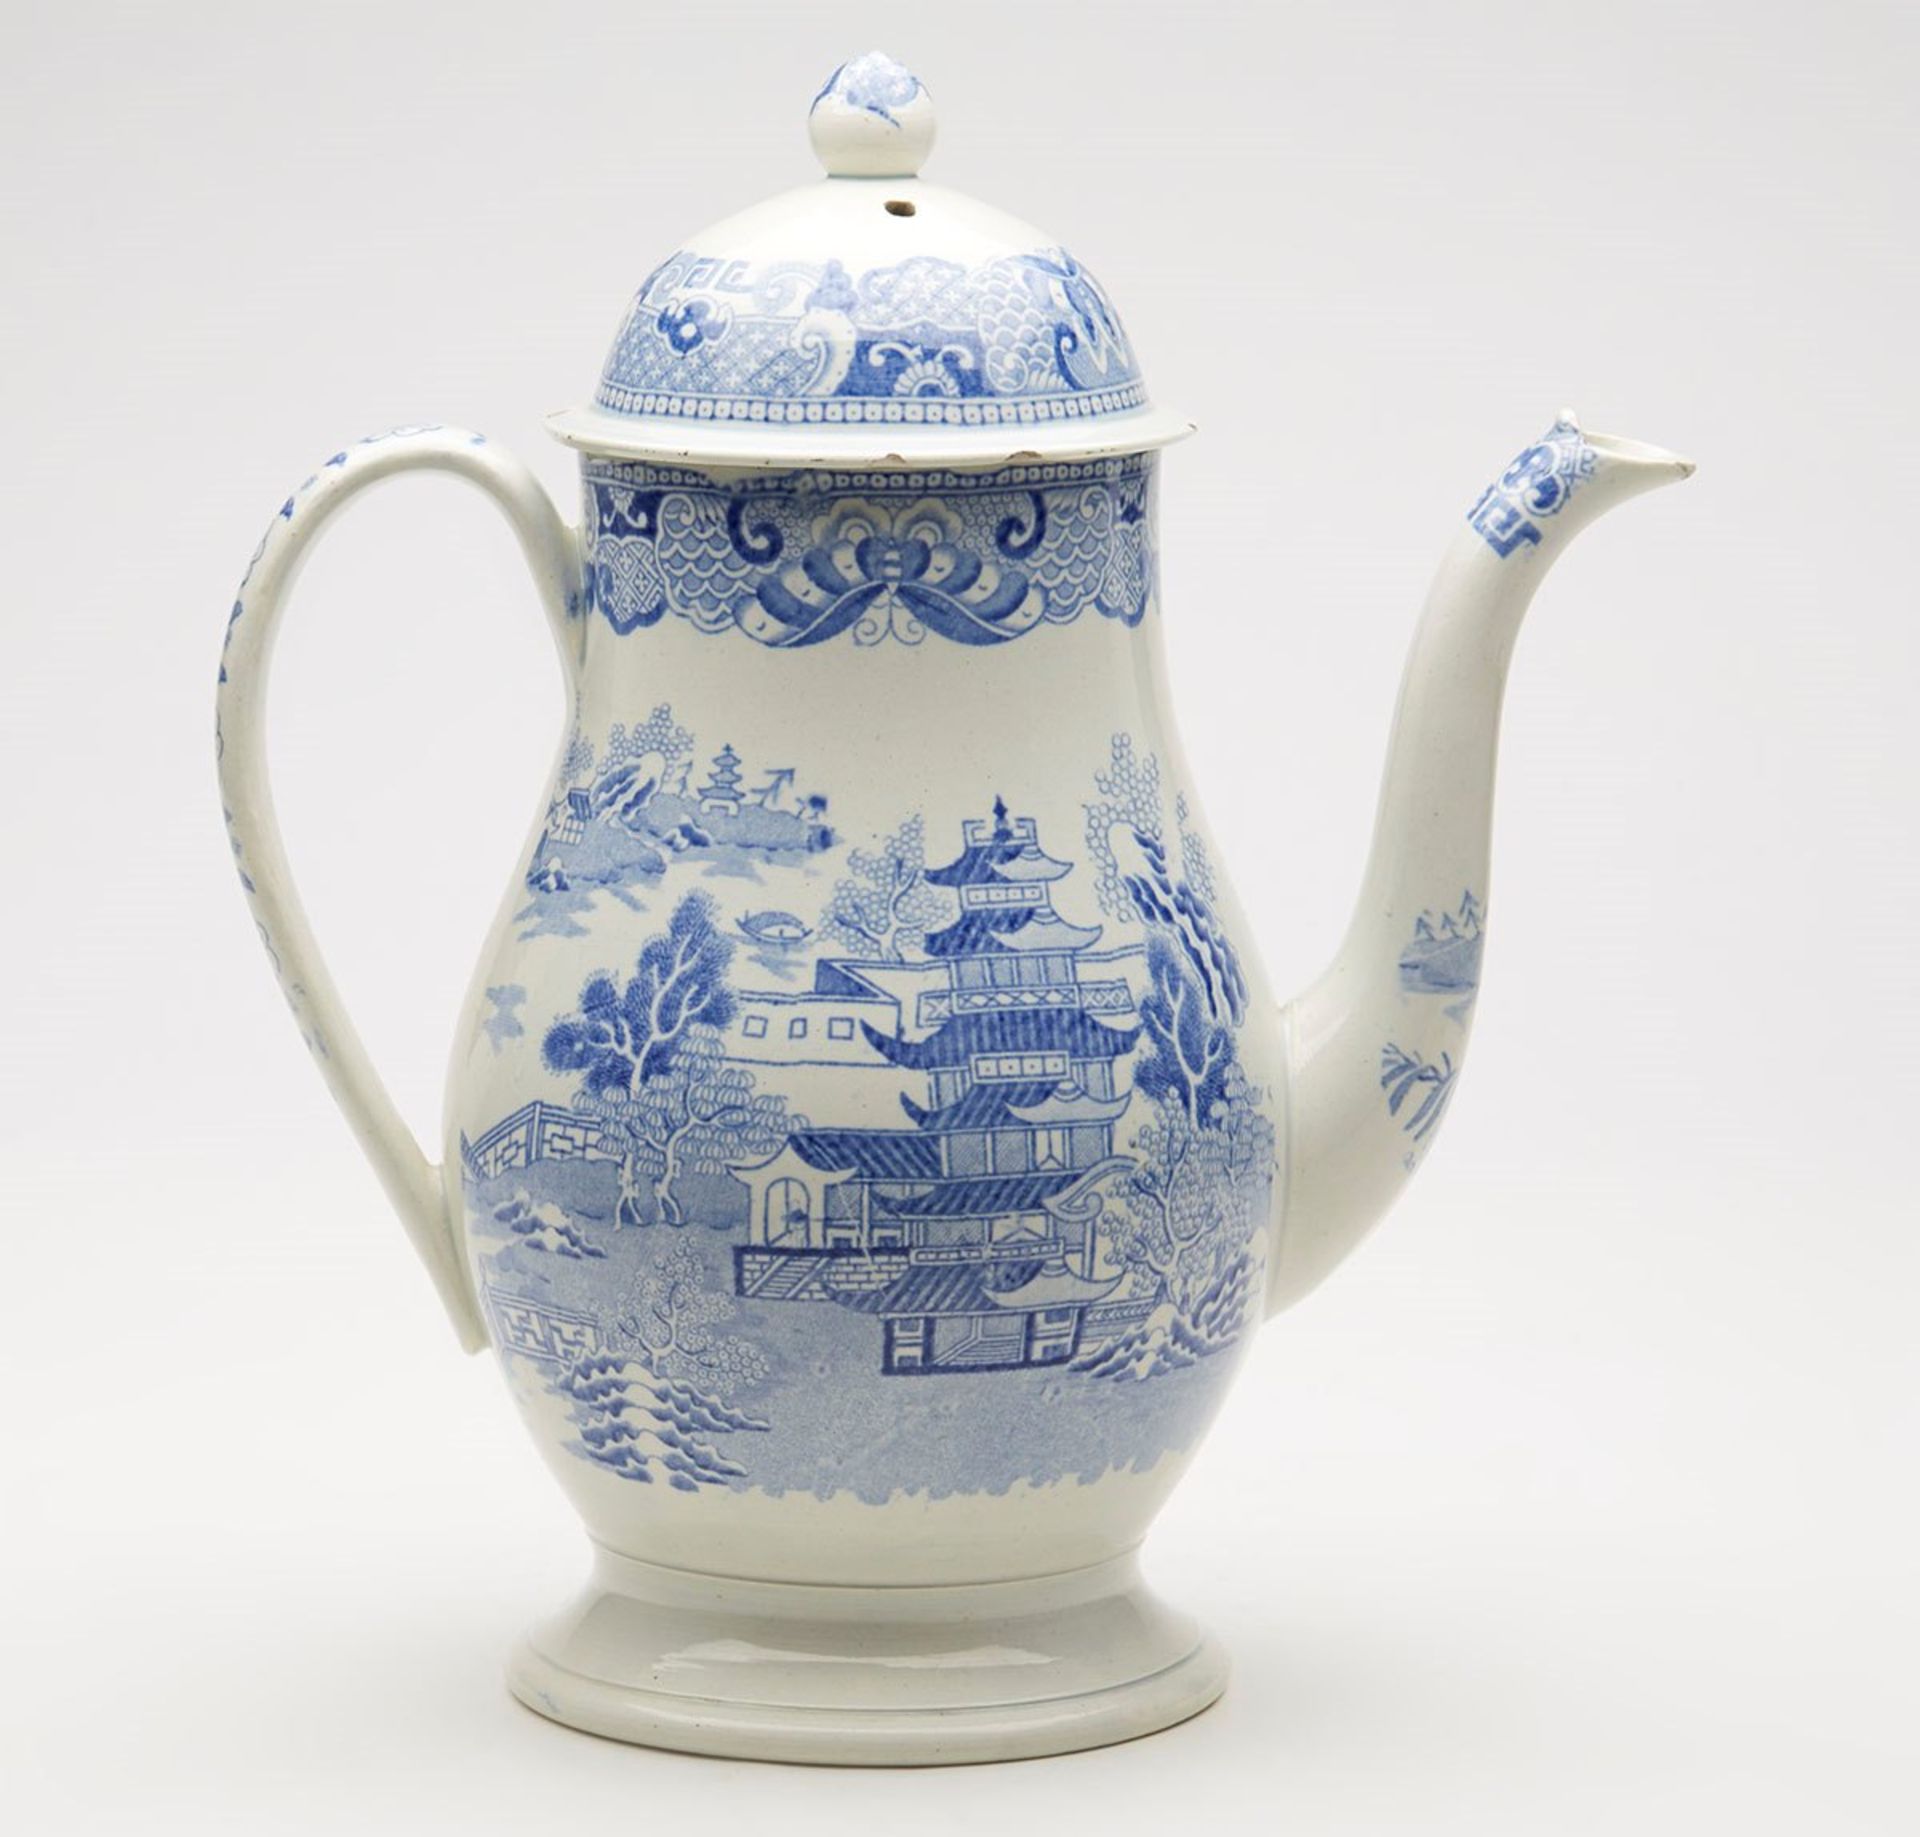 ANTIQUE ENGLISH CHINOISERIE BLUE & WHITE TEAPOT 19TH C.   DIMENSIONS   Height 27cm, Width 23,5cm - Image 5 of 10